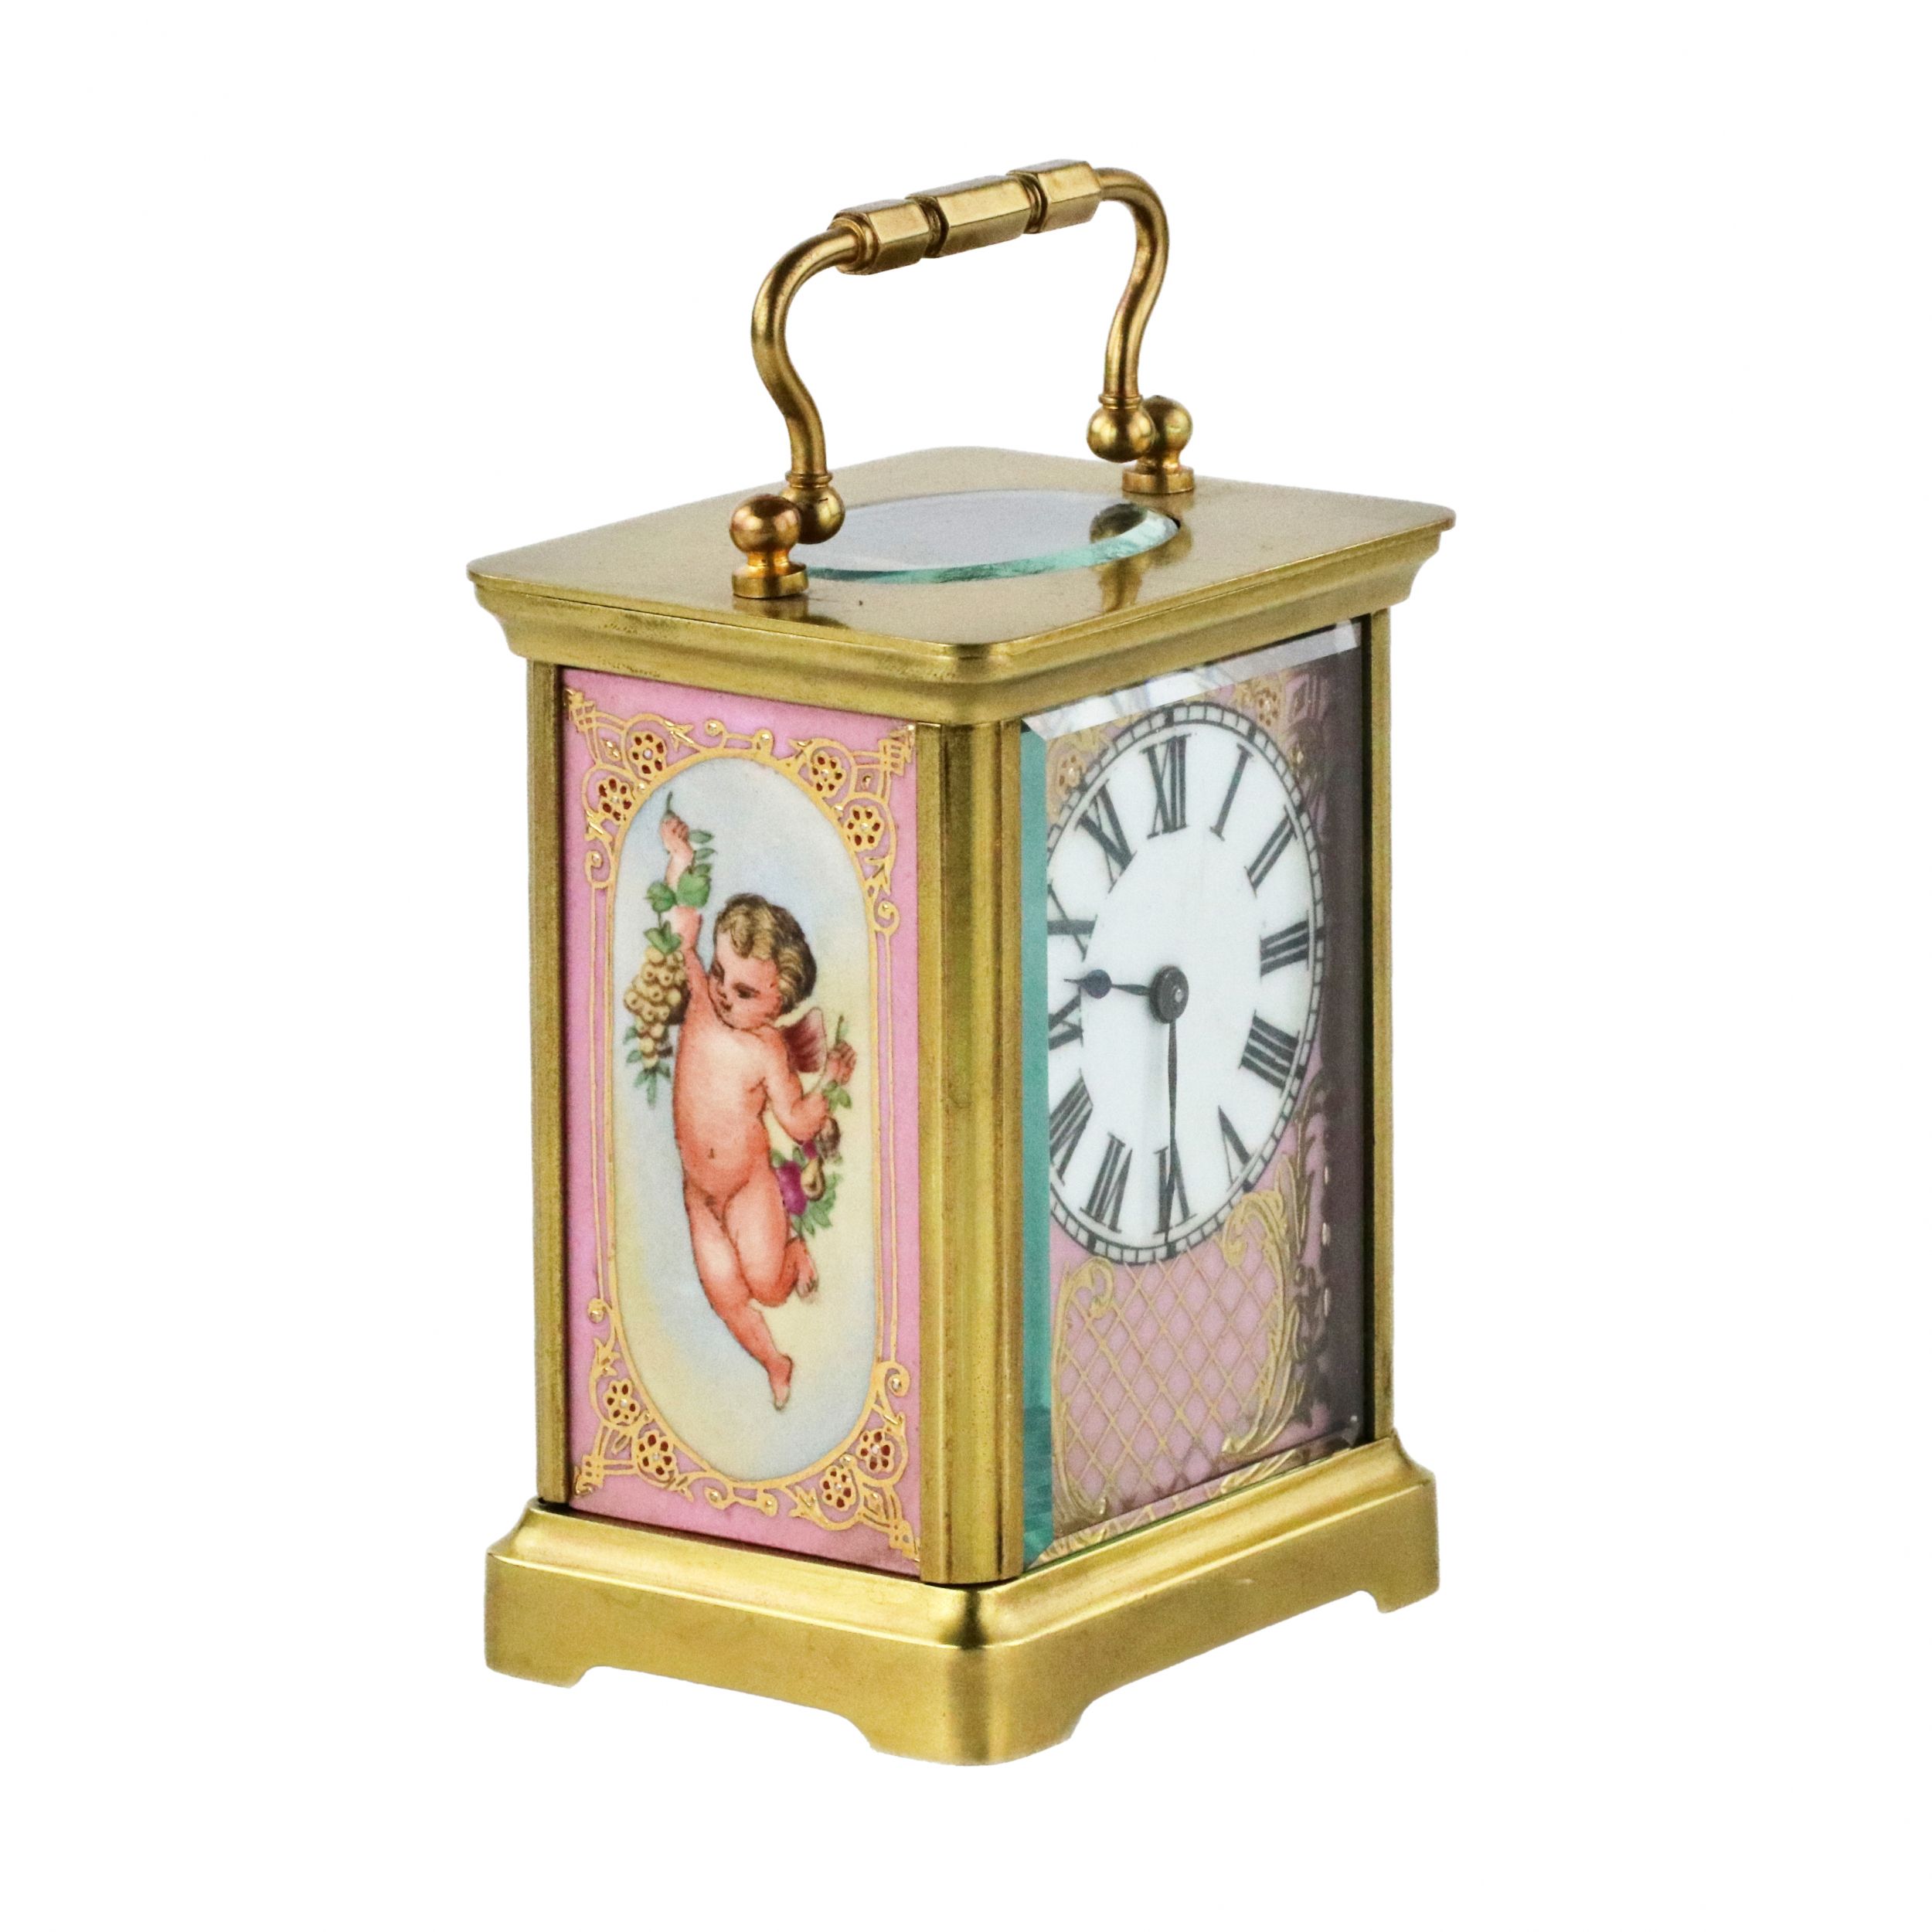 French-carriage-clock-with-porcelain-painting-neo-rococo-style-The-turn-of-the-19th-20th-centuries-